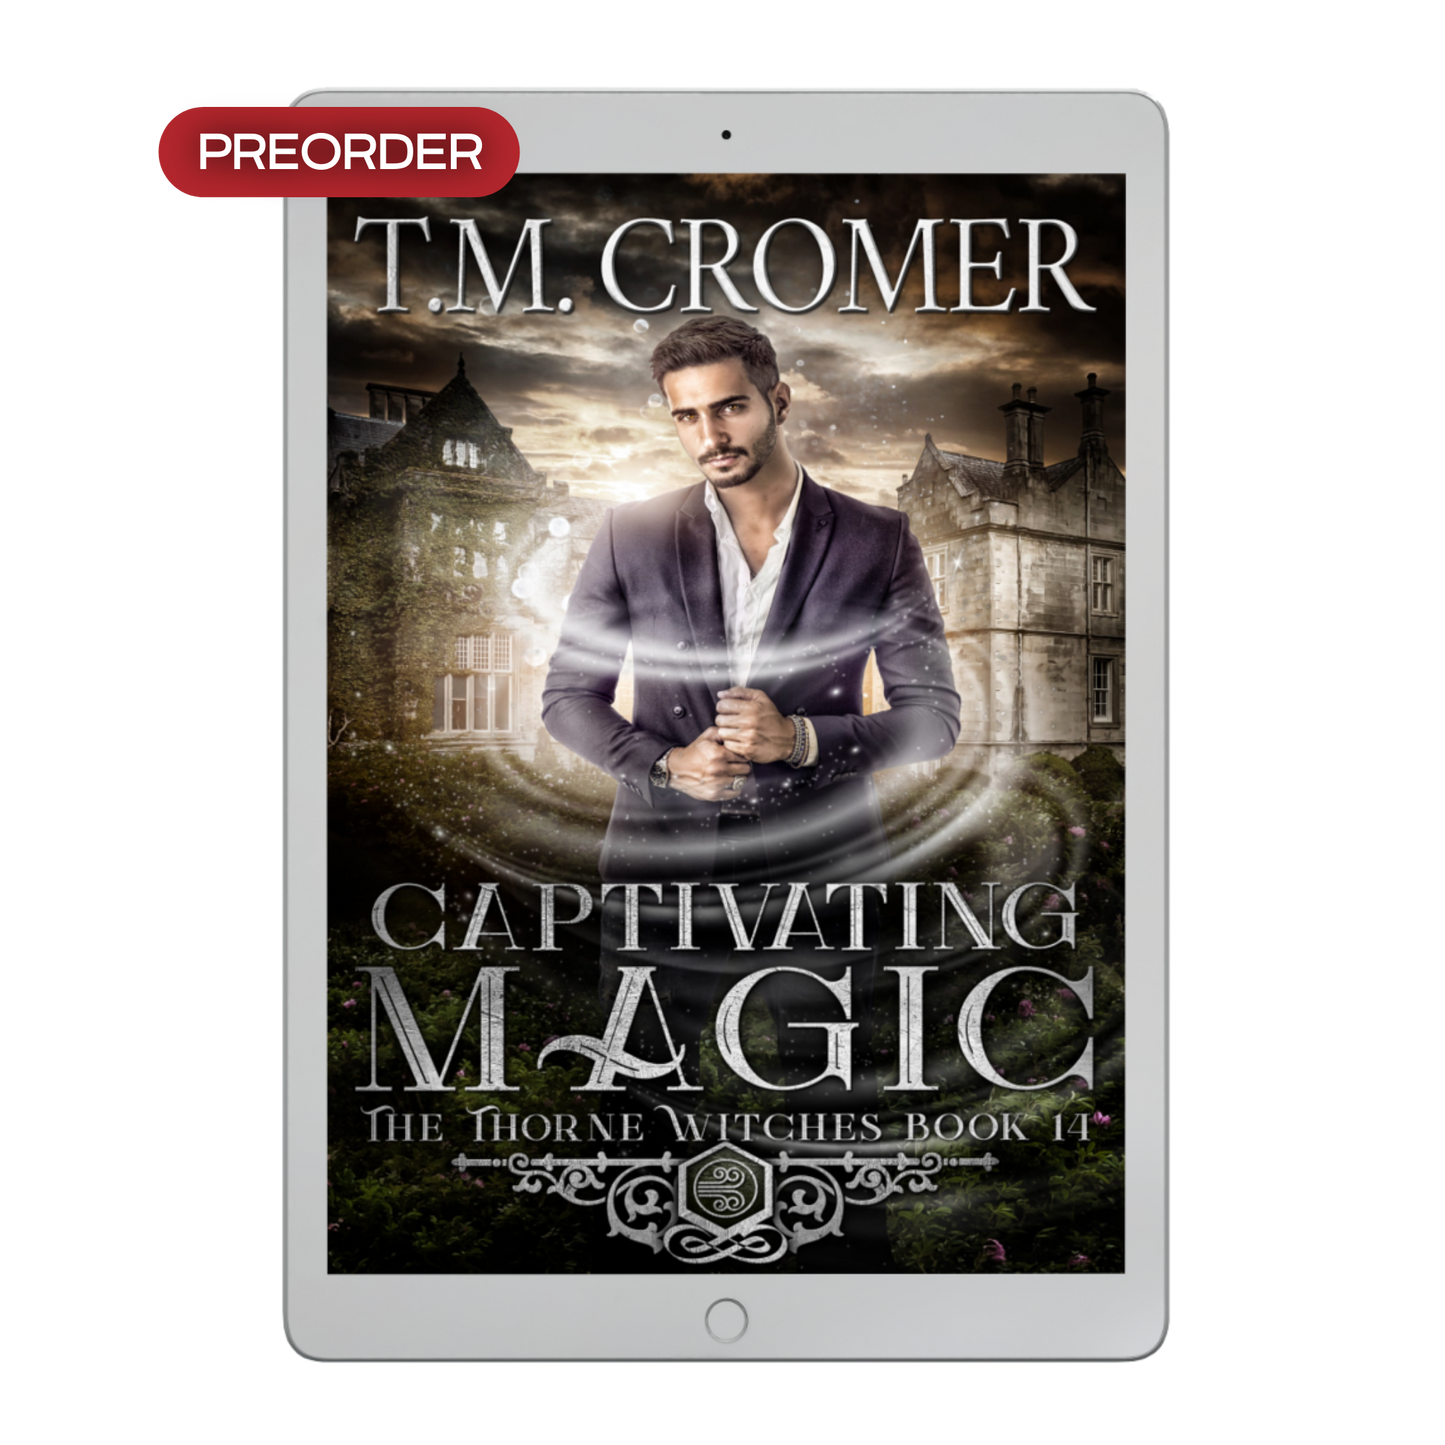 Captivating Magic Ebook The Thorne Witches #14, Paranormal Romance, Urban Fantasy, Magical Realism